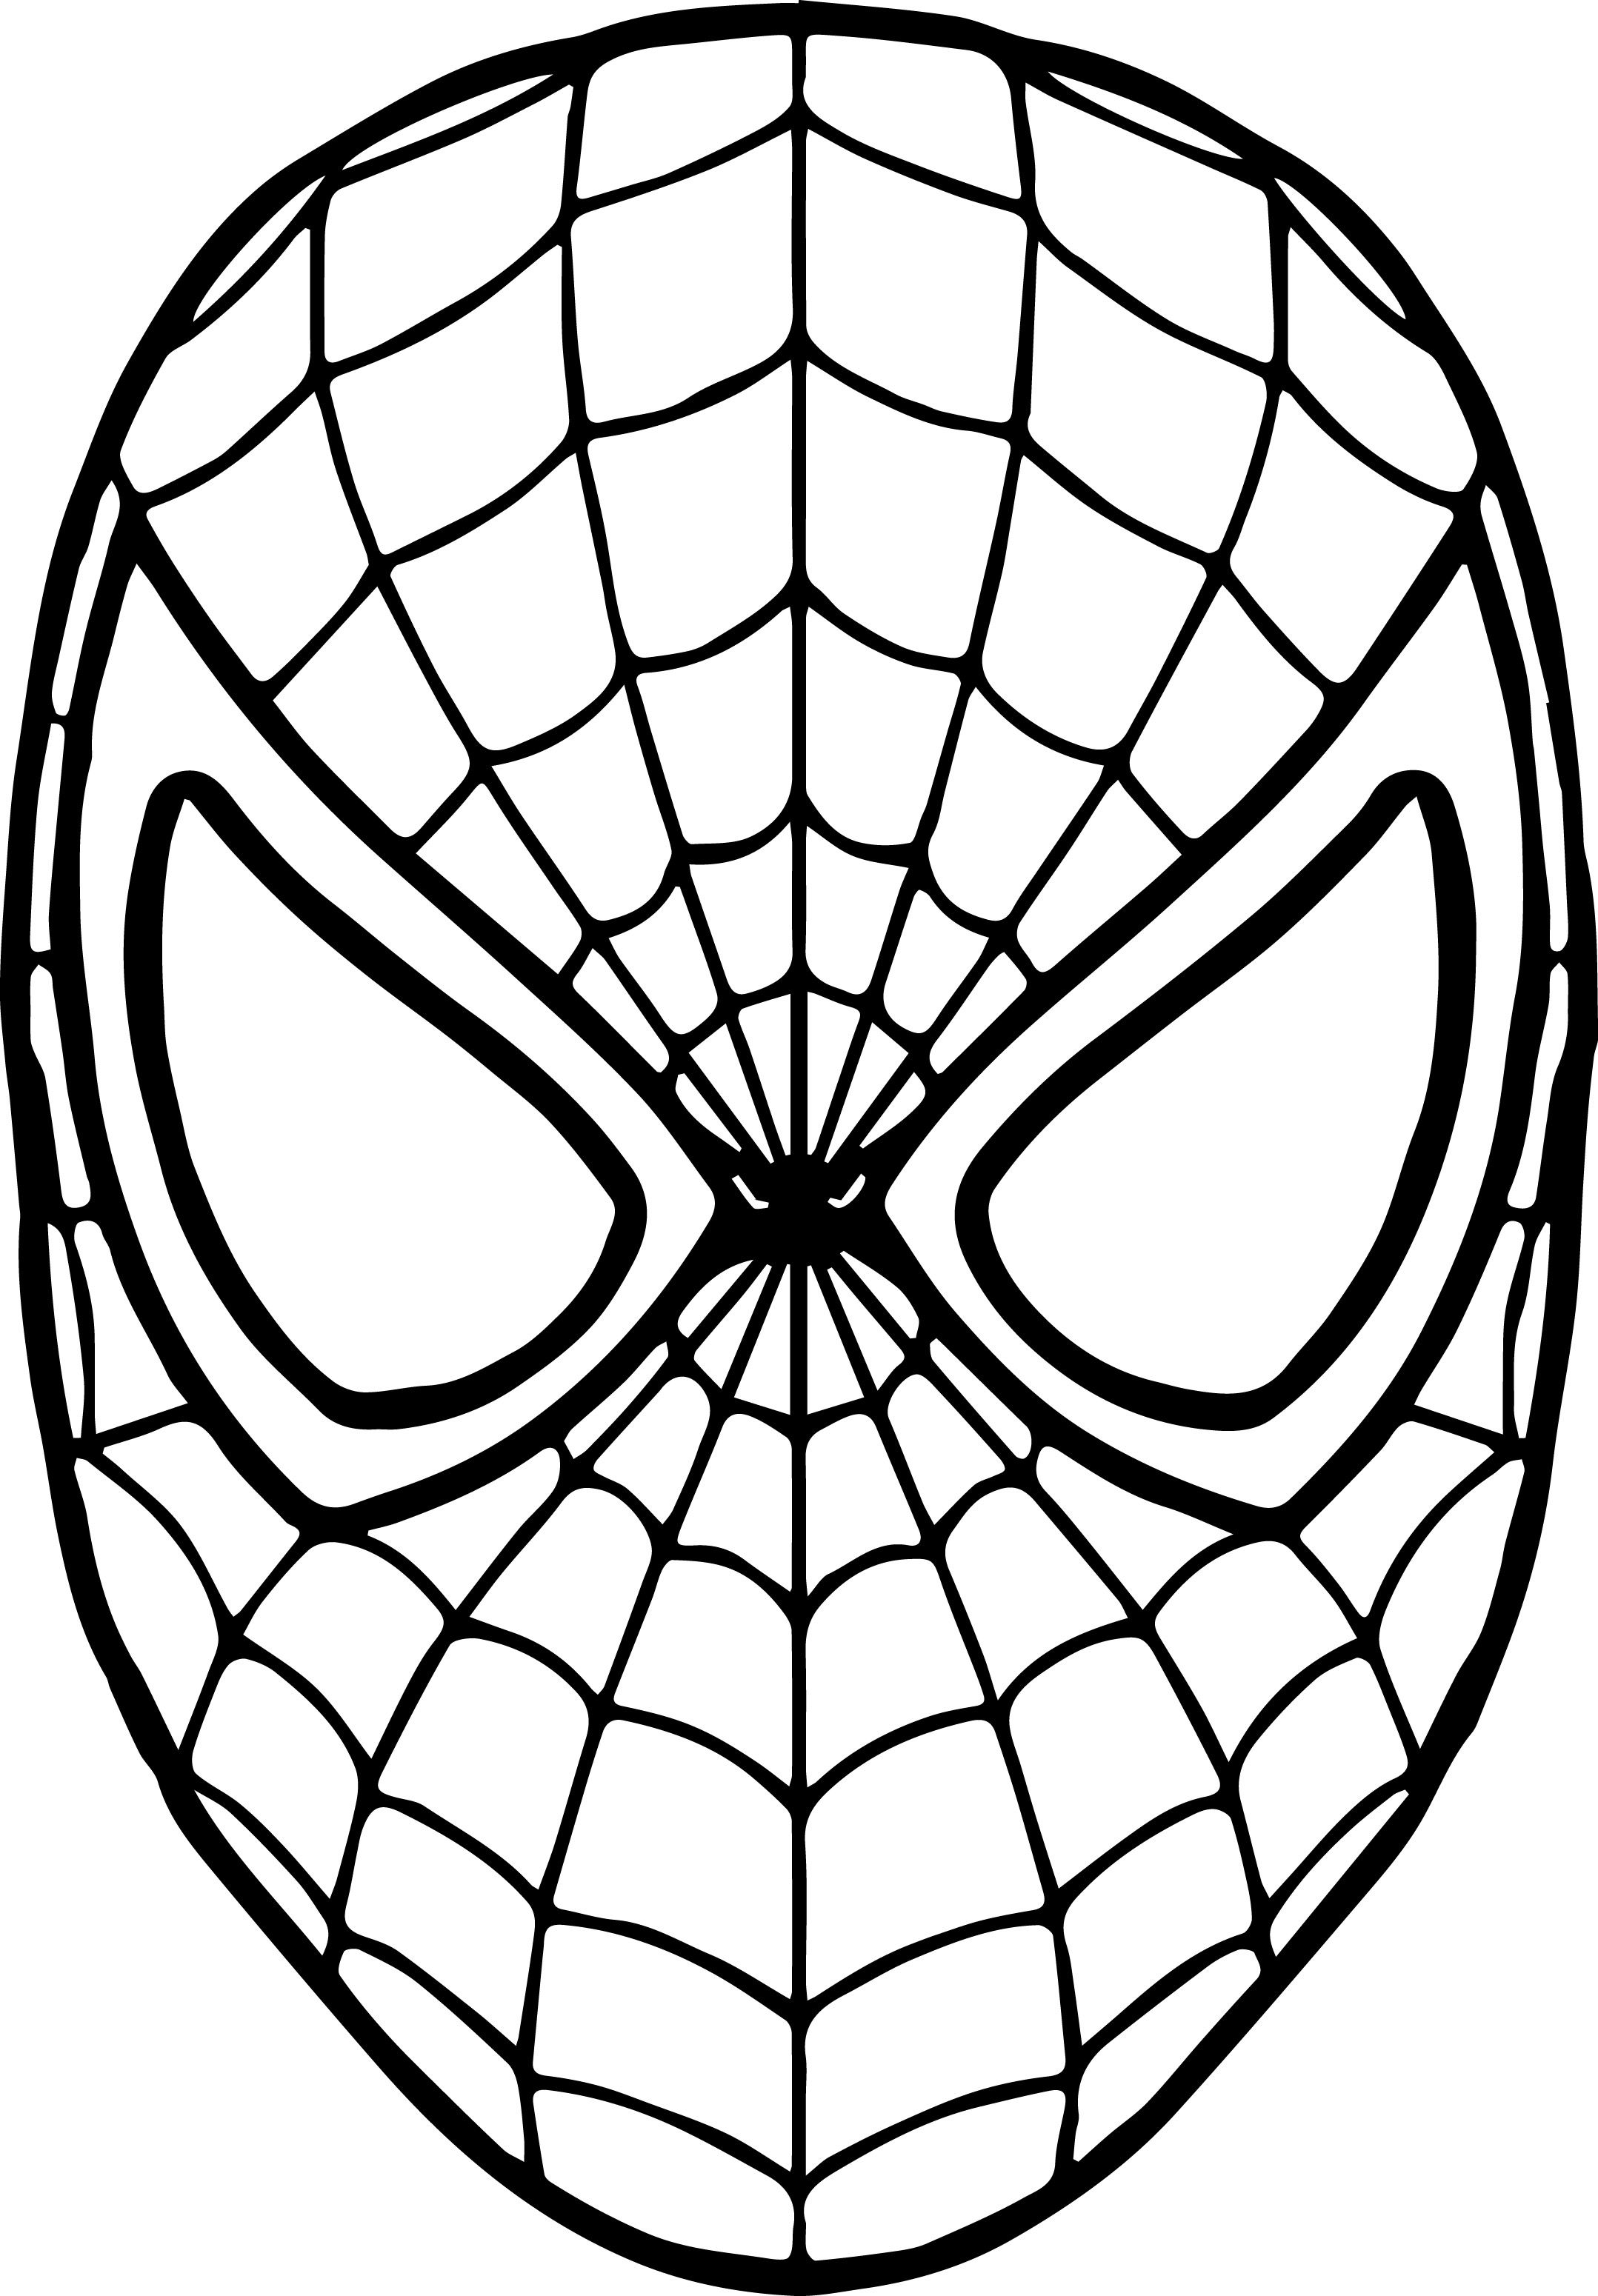 spiderman-mask-coloring-page-spiderman-mask-spiderman-coloring-spiderman-face-coloring-home